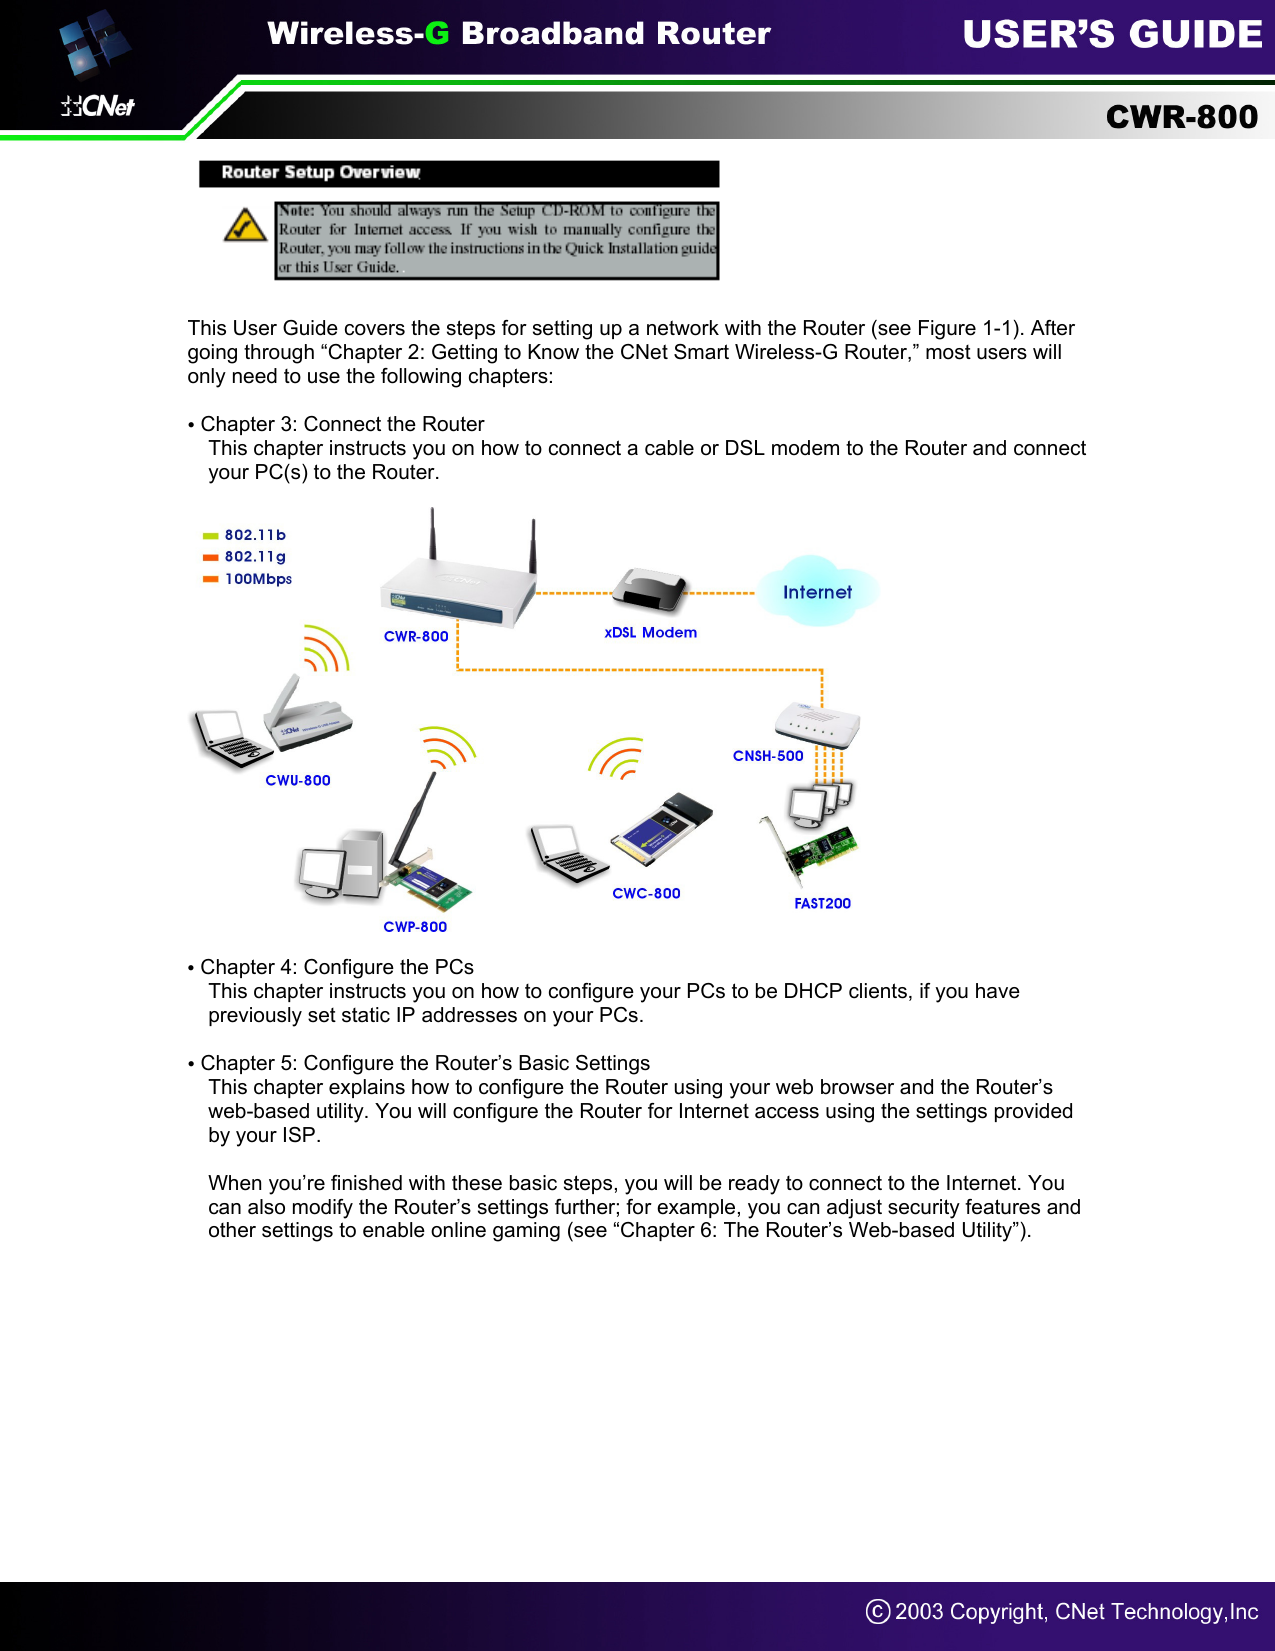   This User Guide covers the steps for setting up a network with the Router (see Figure 1-1). After going through “Chapter 2: Getting to Know the CNet Smart Wireless-G Router,” most users will only need to use the following chapters:  • Chapter 3: Connect the Router This chapter instructs you on how to connect a cable or DSL modem to the Router and connect your PC(s) to the Router.    • Chapter 4: Configure the PCs This chapter instructs you on how to configure your PCs to be DHCP clients, if you have previously set static IP addresses on your PCs.  • Chapter 5: Configure the Router’s Basic Settings   This chapter explains how to configure the Router using your web browser and the Router’s web-based utility. You will configure the Router for Internet access using the settings provided by your ISP.  When you’re finished with these basic steps, you will be ready to connect to the Internet. You can also modify the Router’s settings further; for example, you can adjust security features and other settings to enable online gaming (see “Chapter 6: The Router’s Web-based Utility”).          